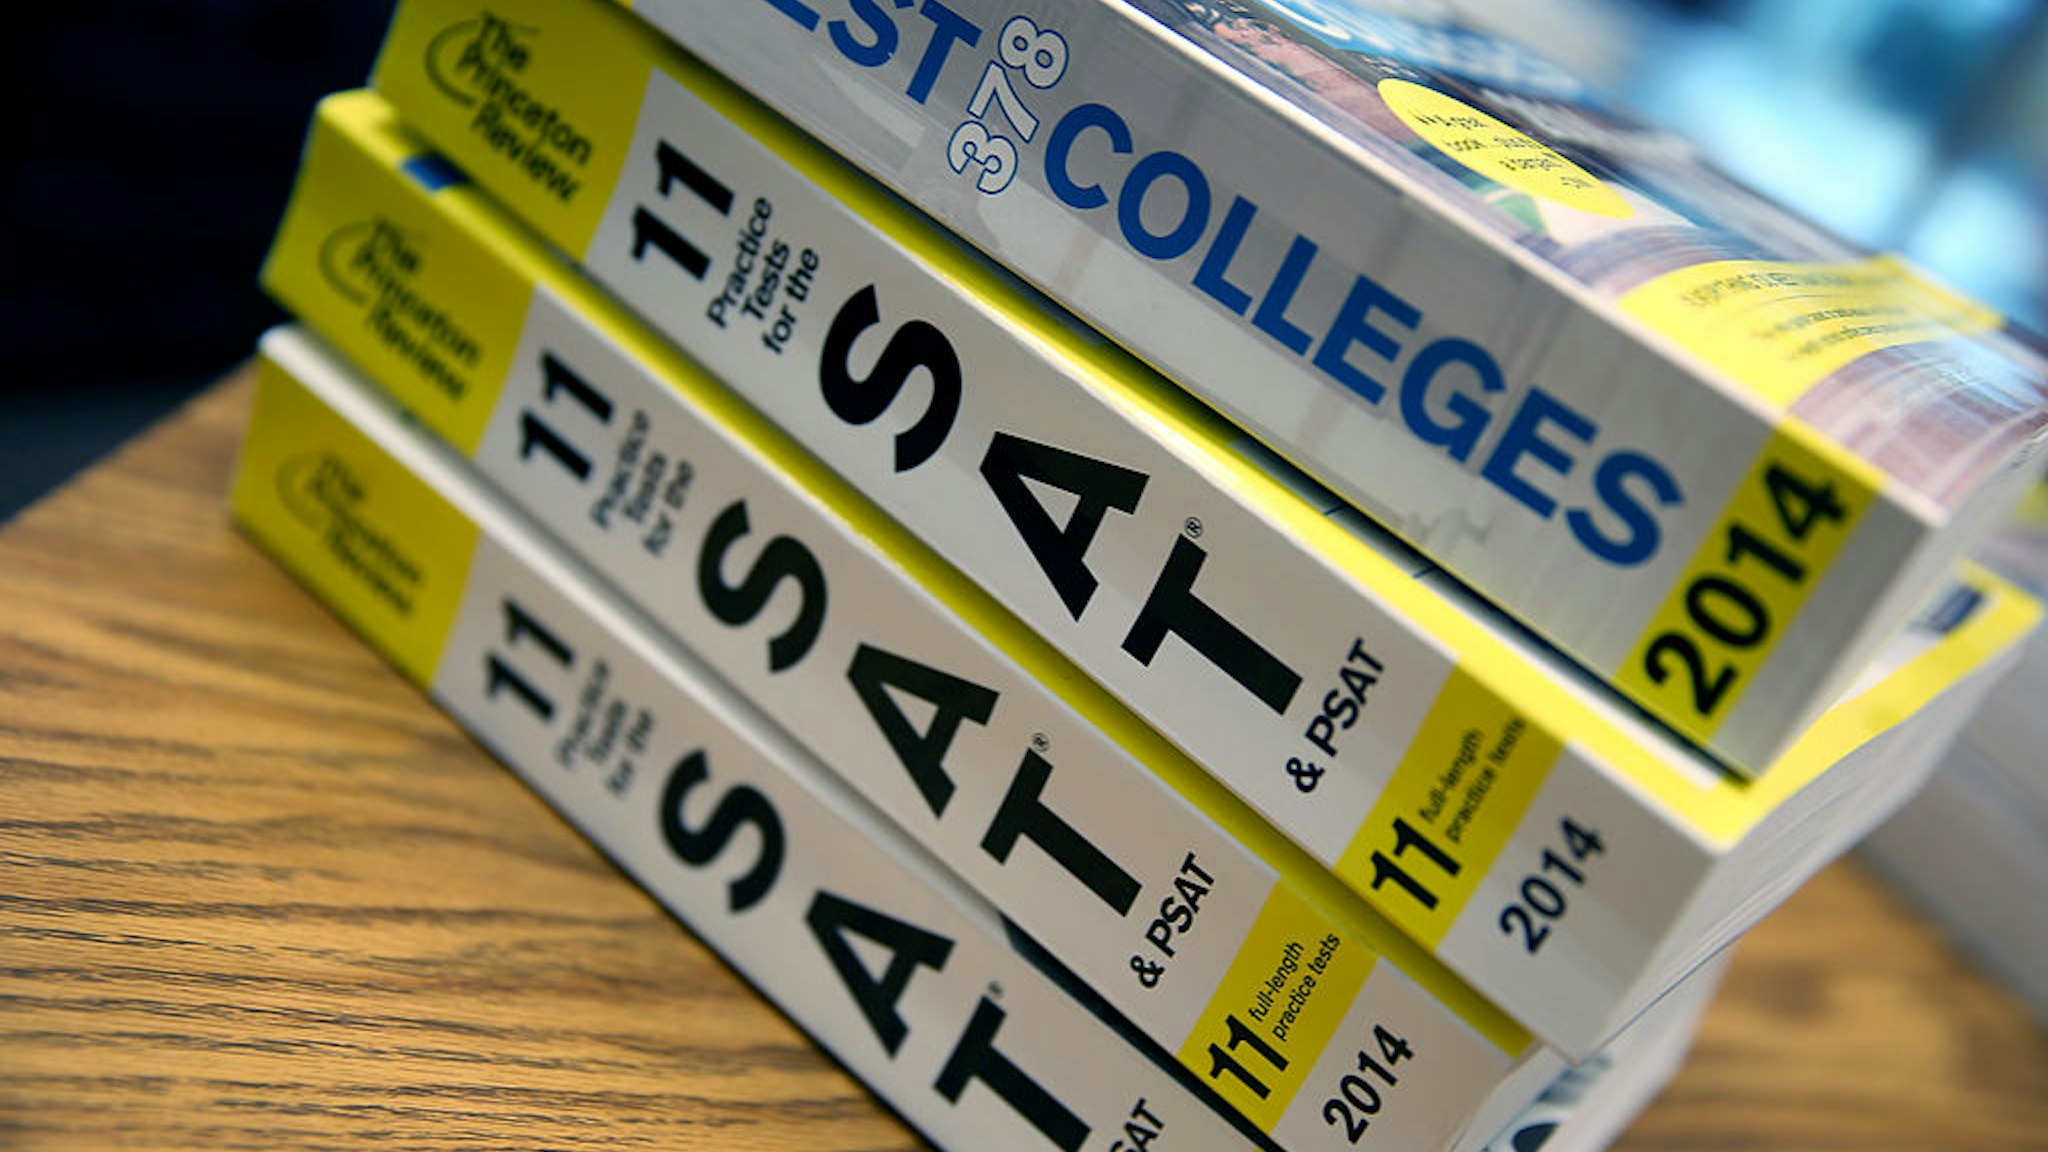 Princeton Review SAT Preparation books are seen on March 6, 2014 in Miami, Florida.